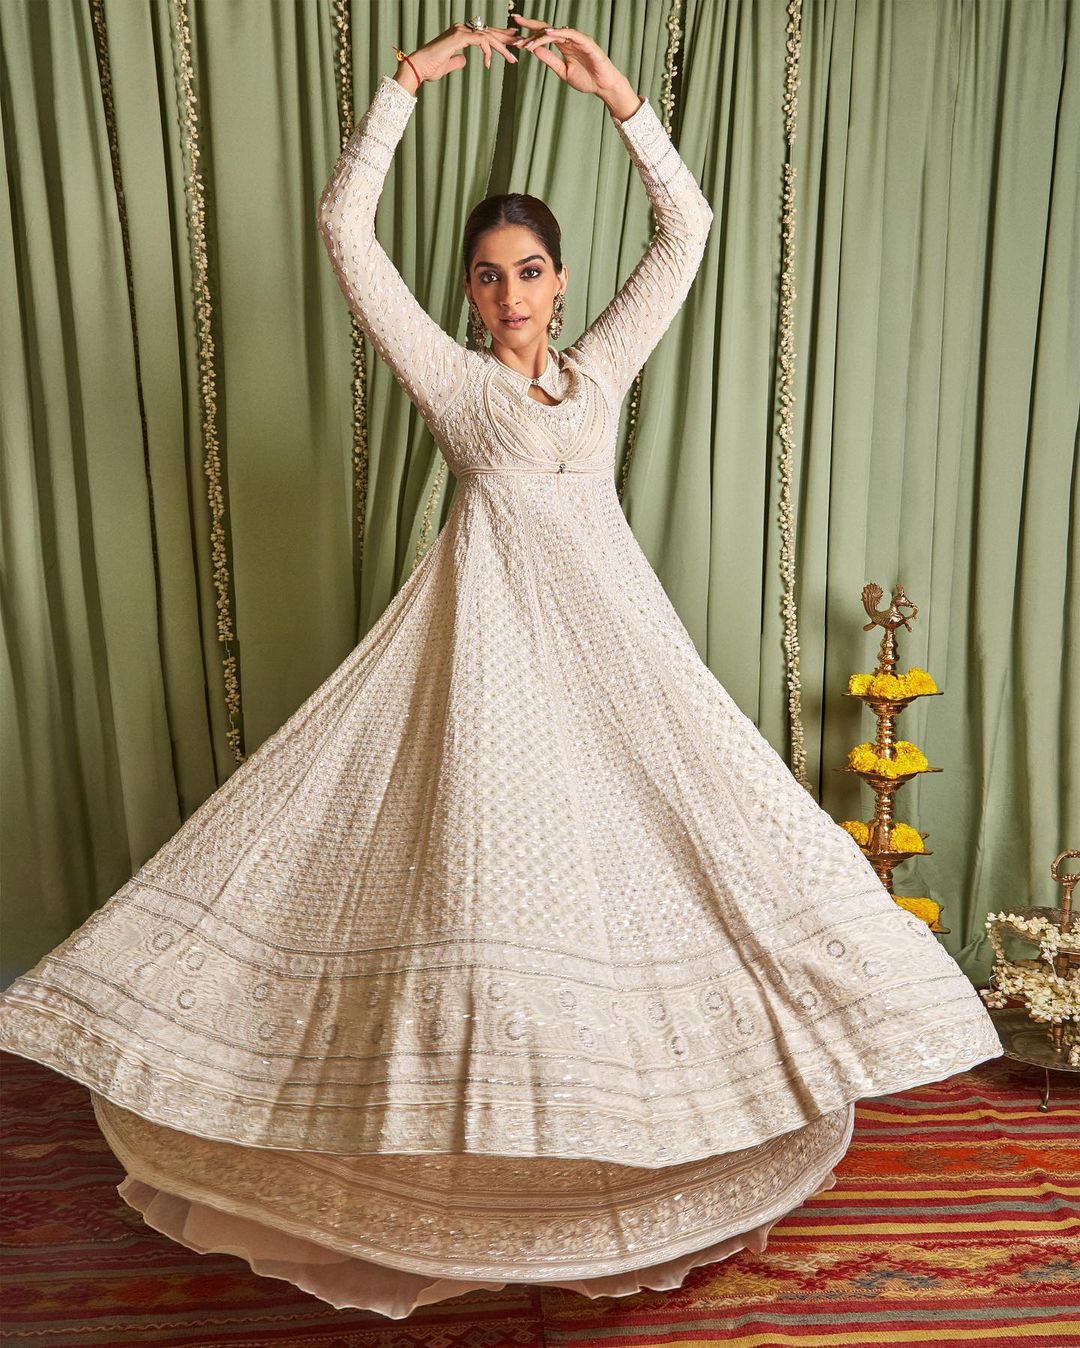 Sonam Kapoor is sophistication personified in sheer white ruffle dress |  TOIPhotogallery